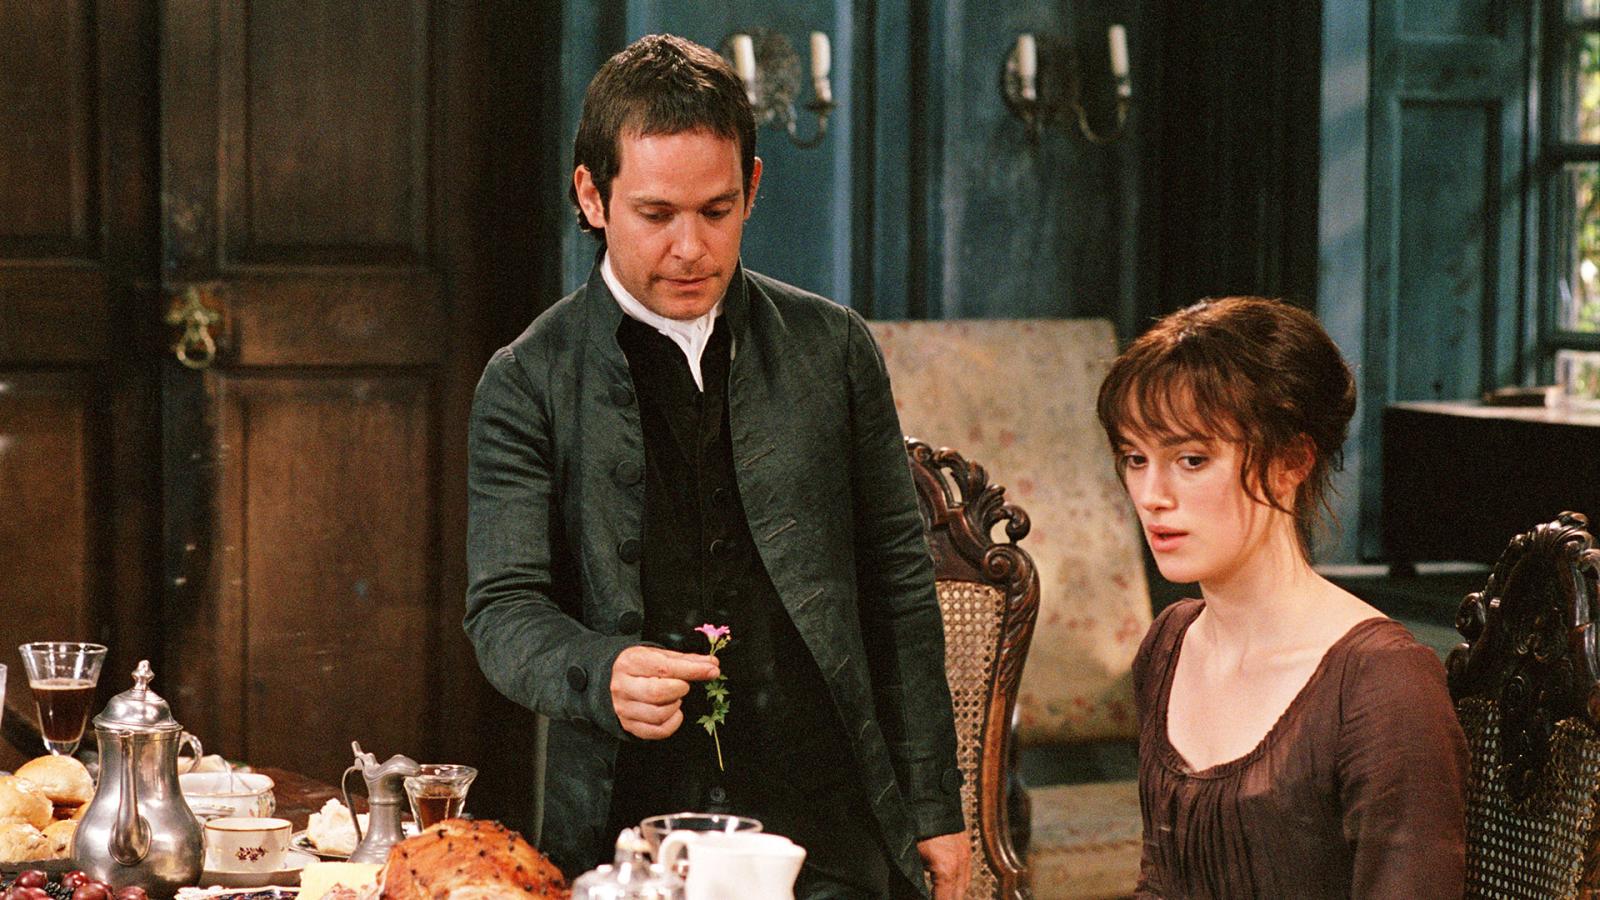 Top 10 Best Movie Adaptations of Classic Literature - image 6